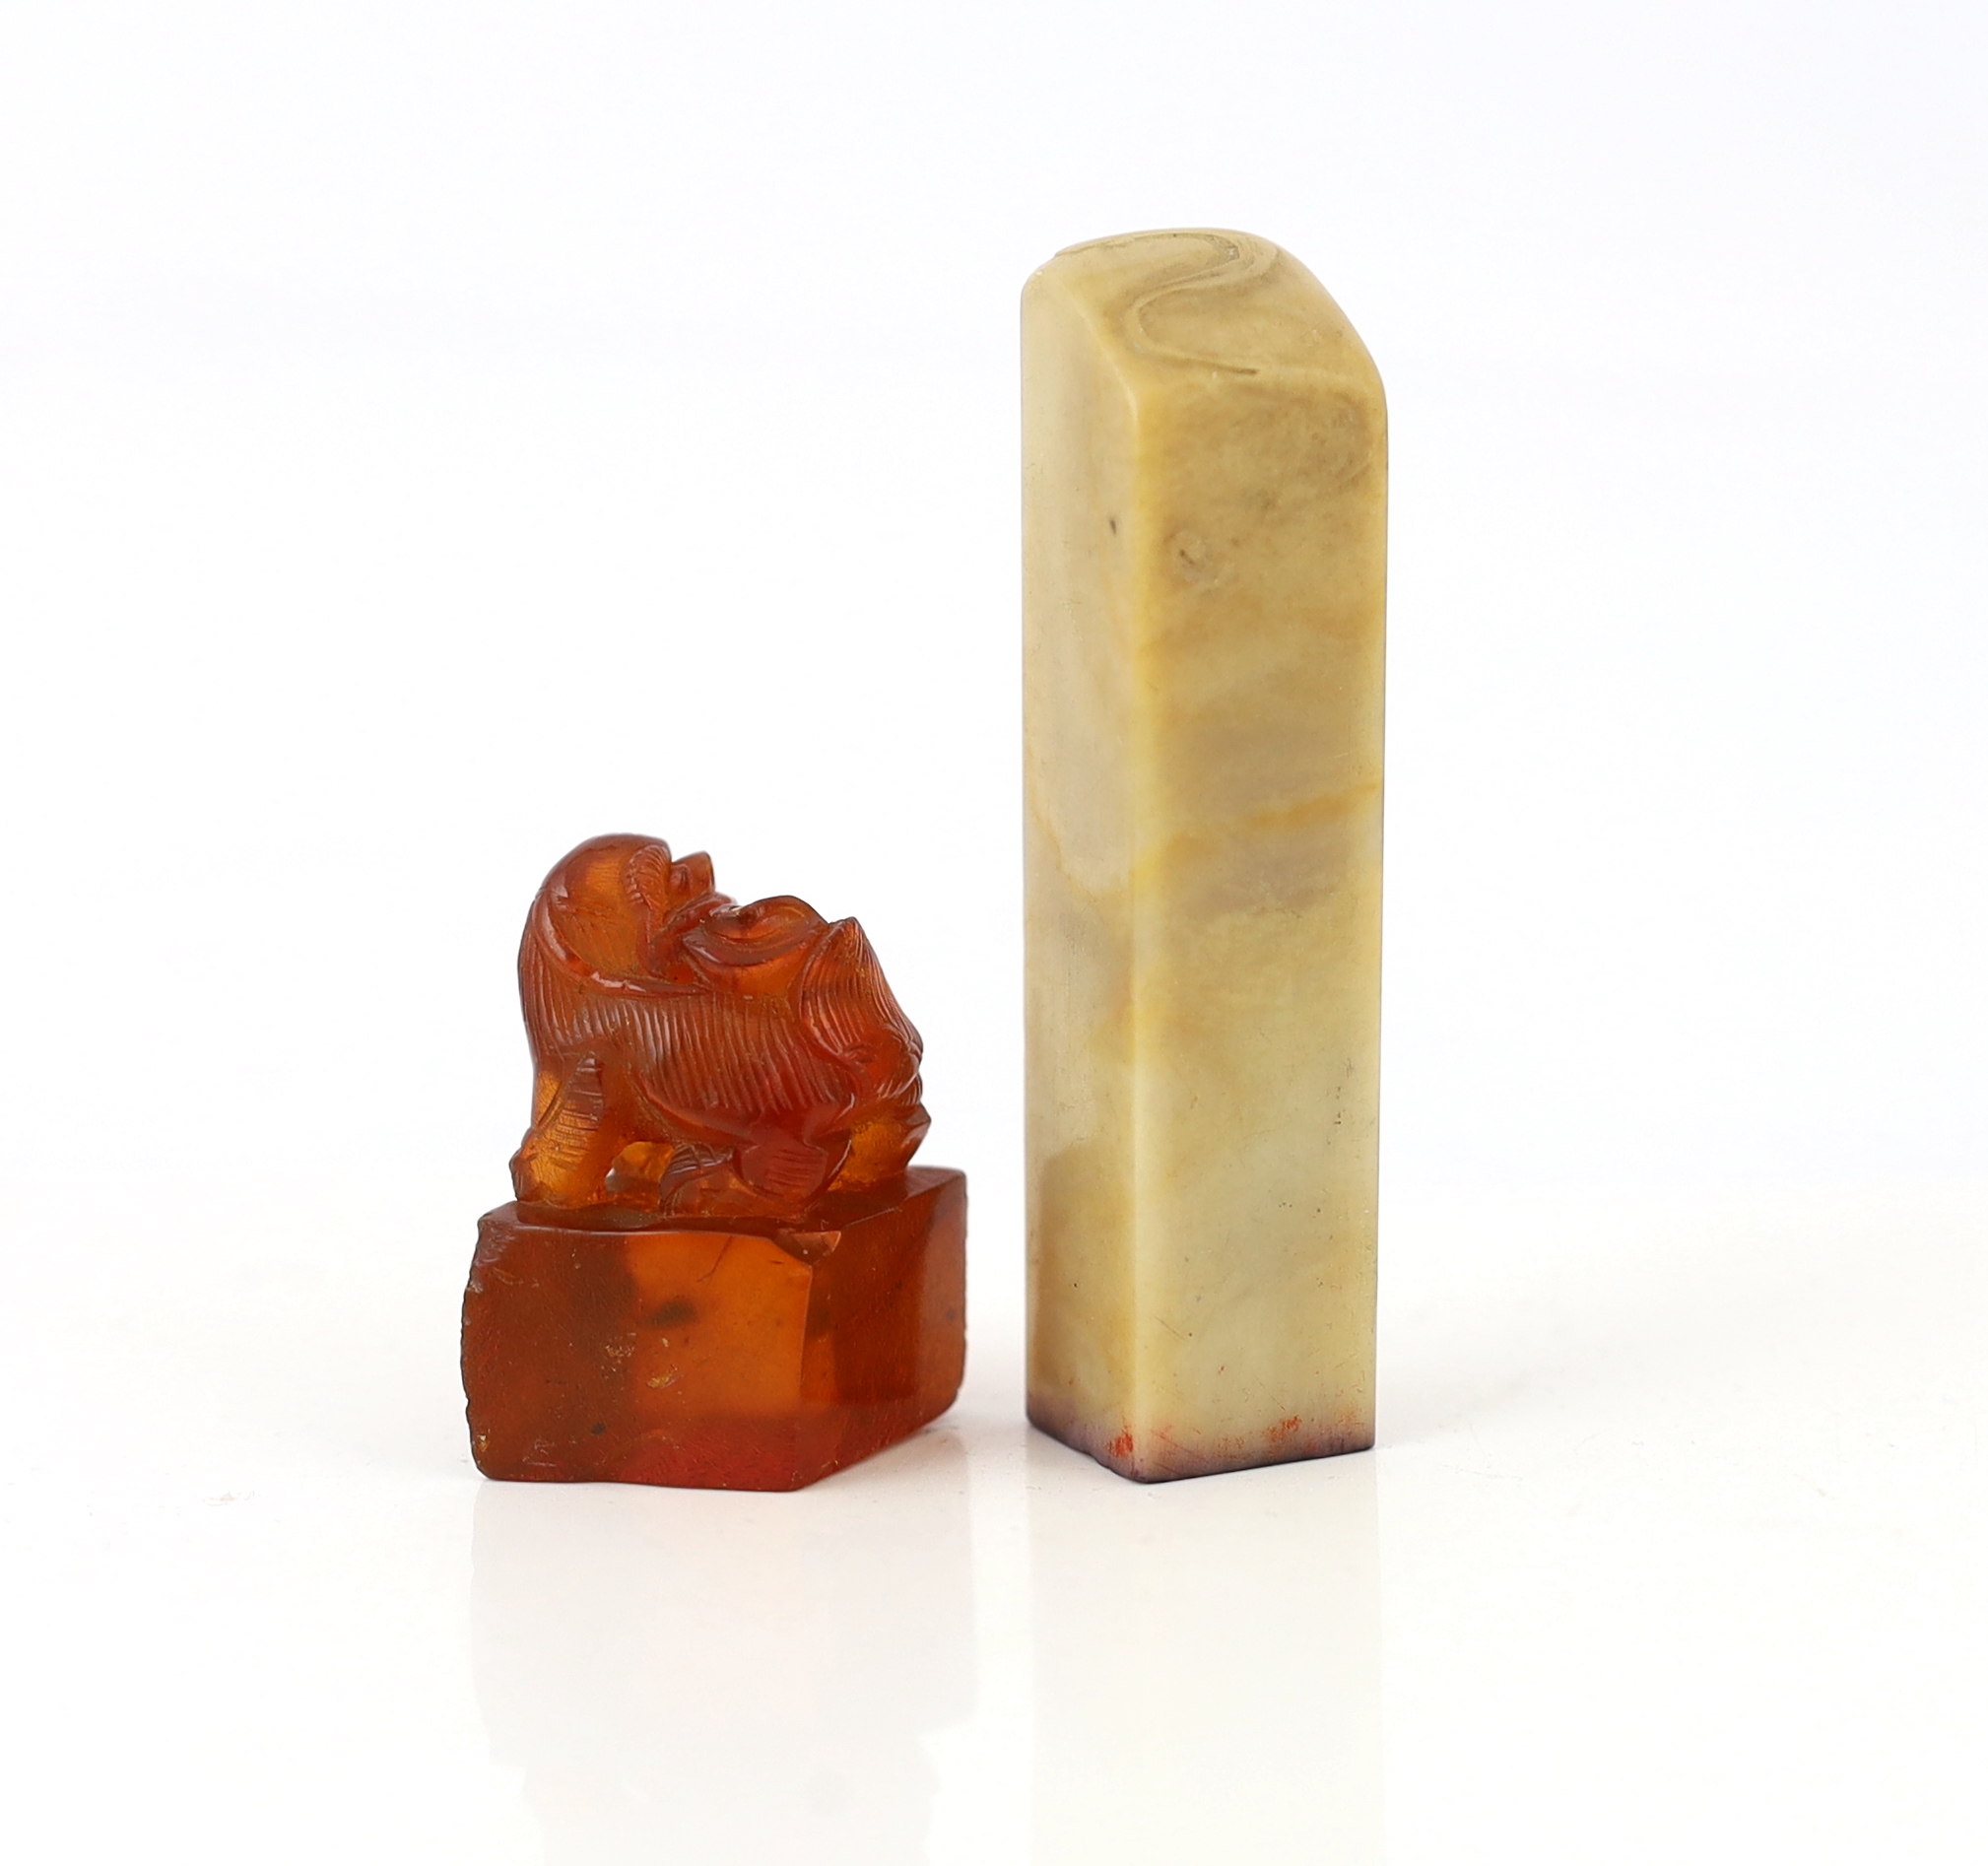 A 19th century Chinese amber ‘lion-dog’ seal and a 20th century soapstone seal